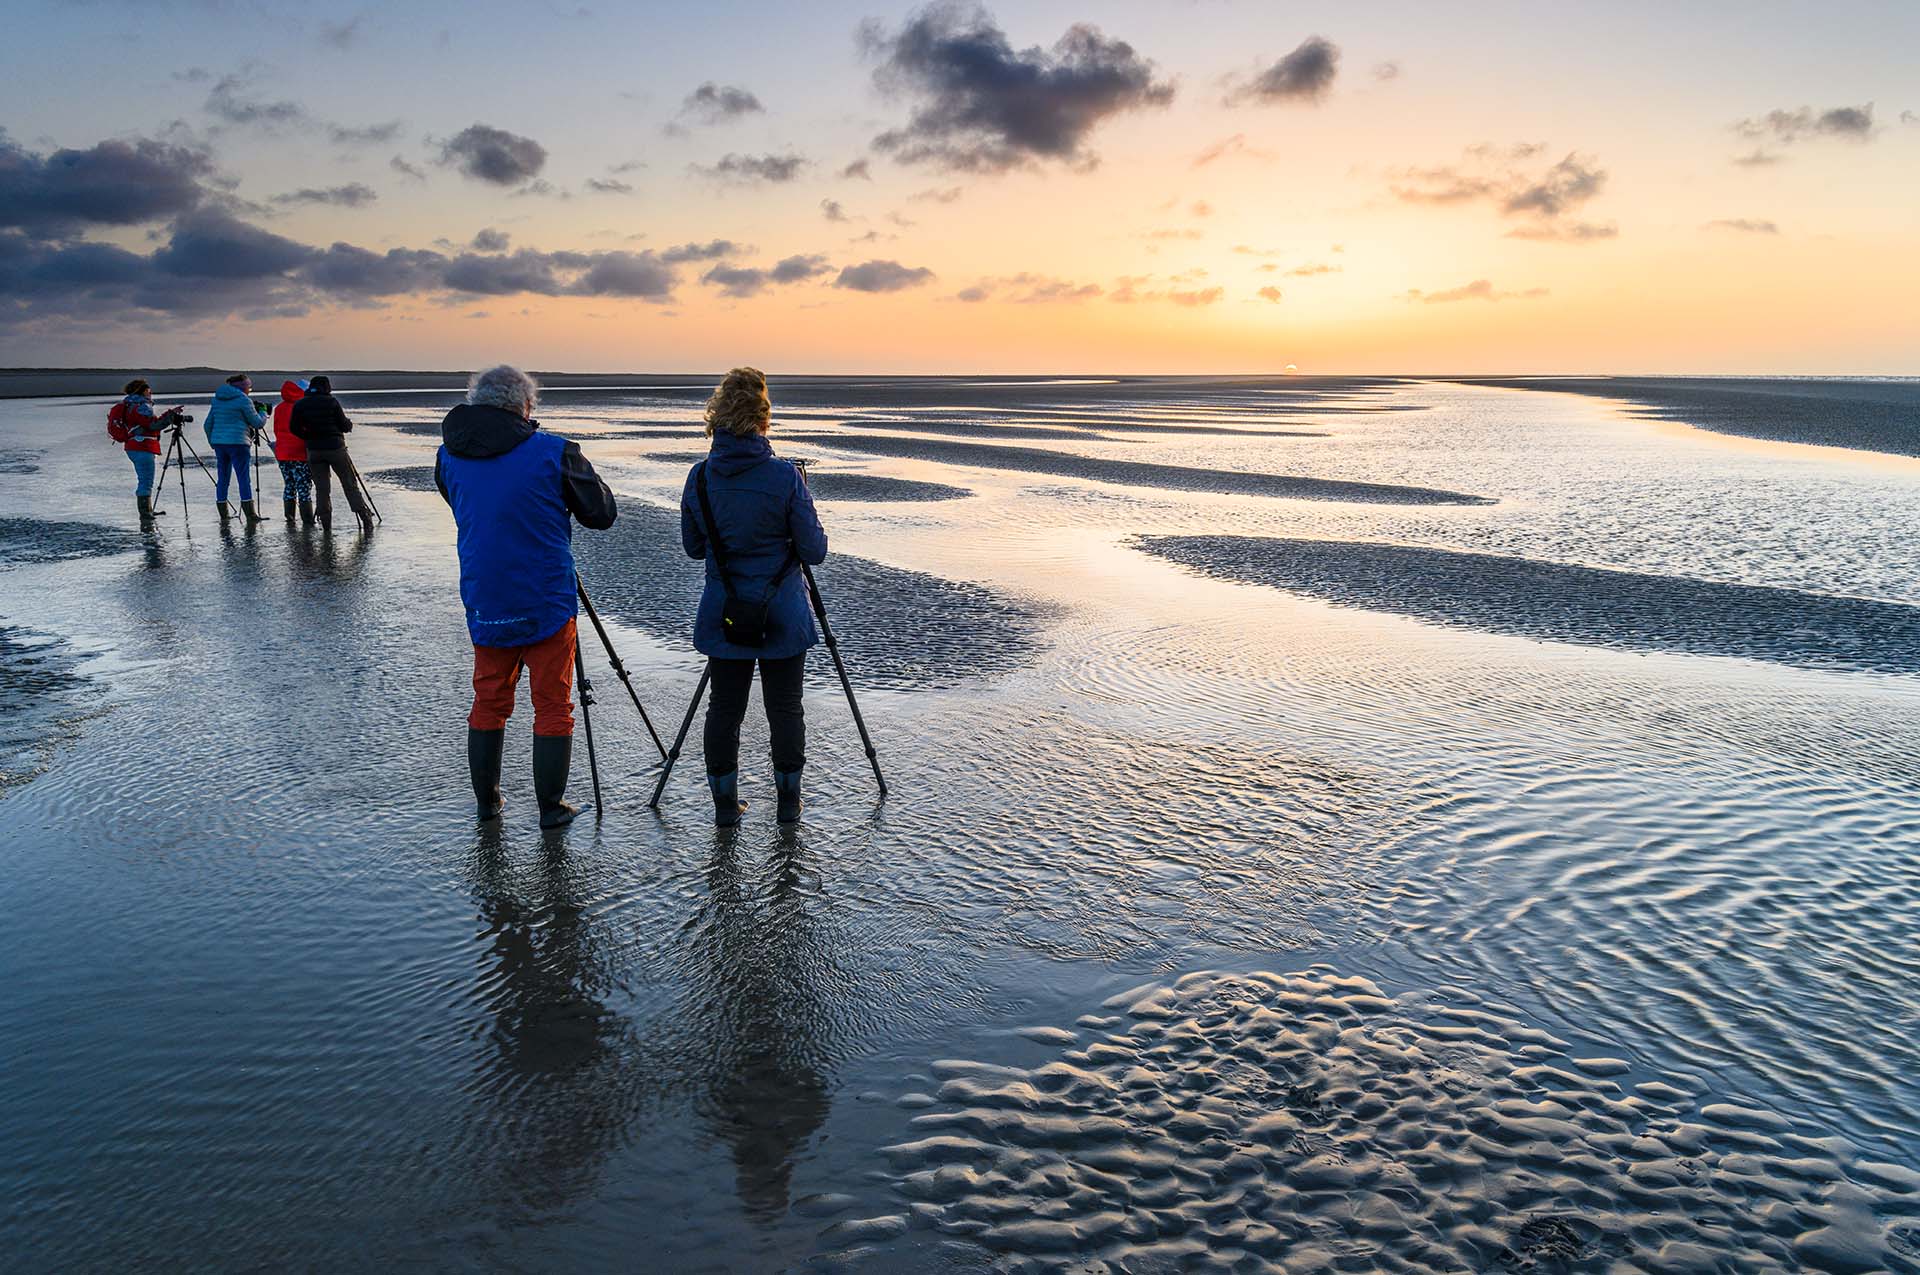 Workshop participants at sunset on the beach of Ameland.